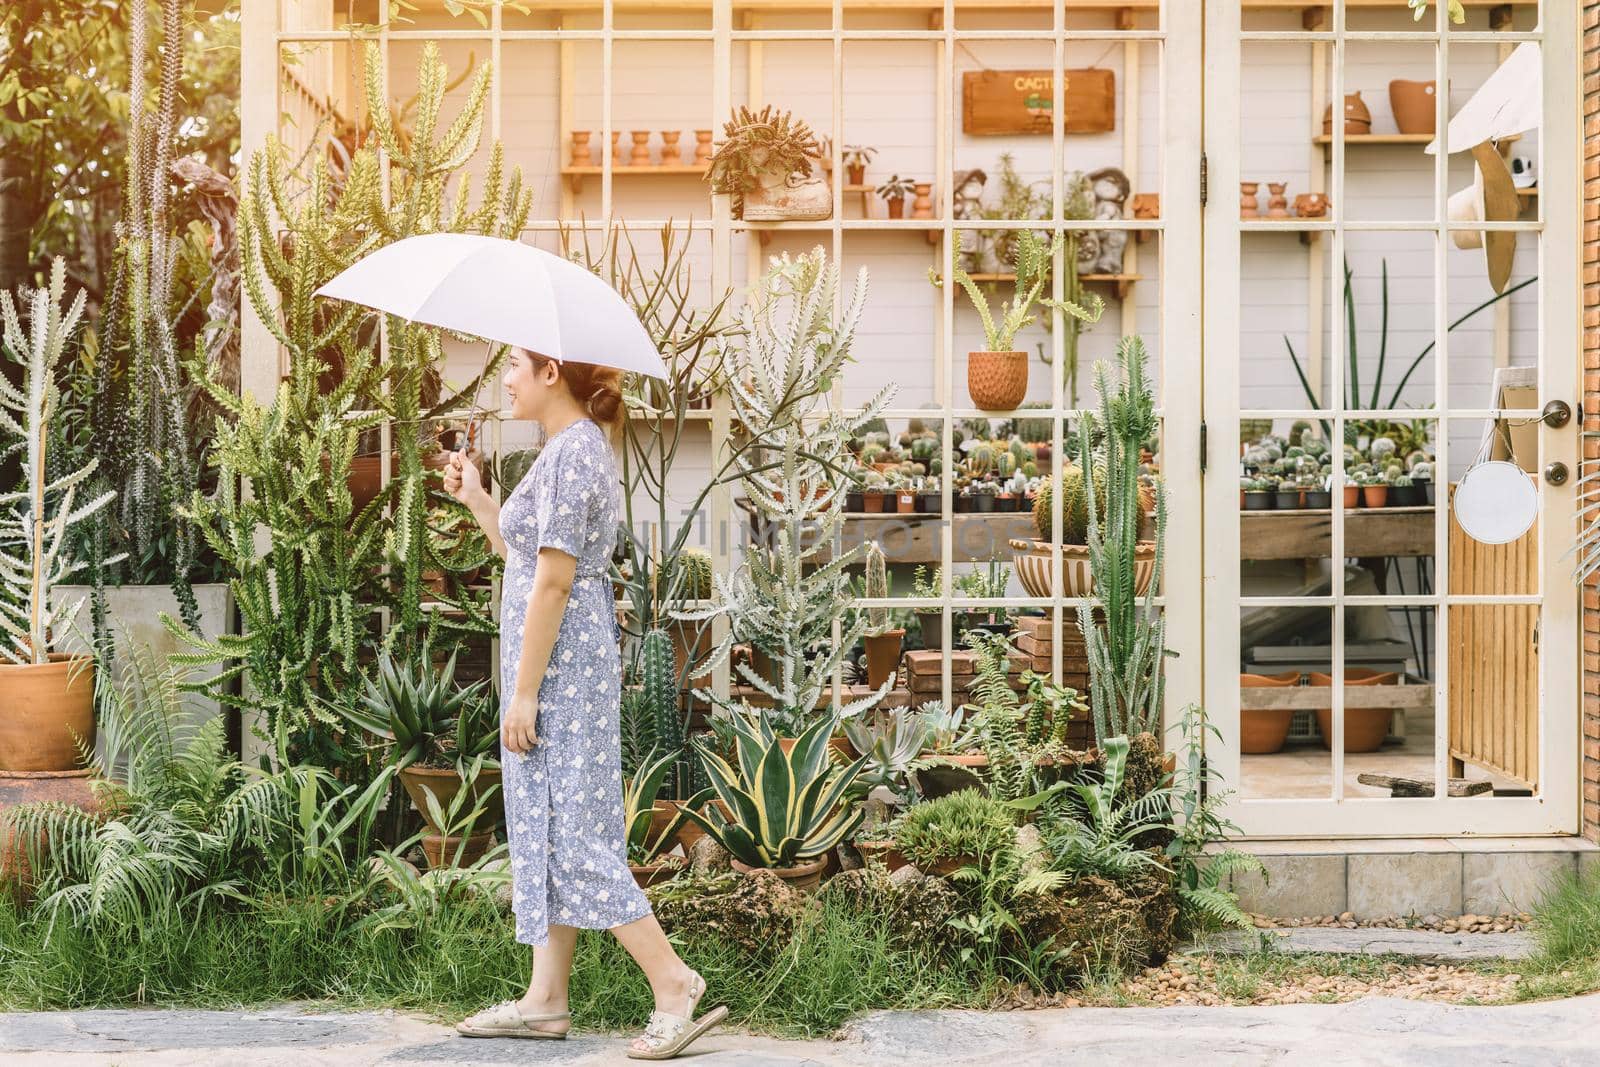 Asian women walking leisure around with nature garden cactus nursery plant shop in summer season with umbrella. by qualitystocks